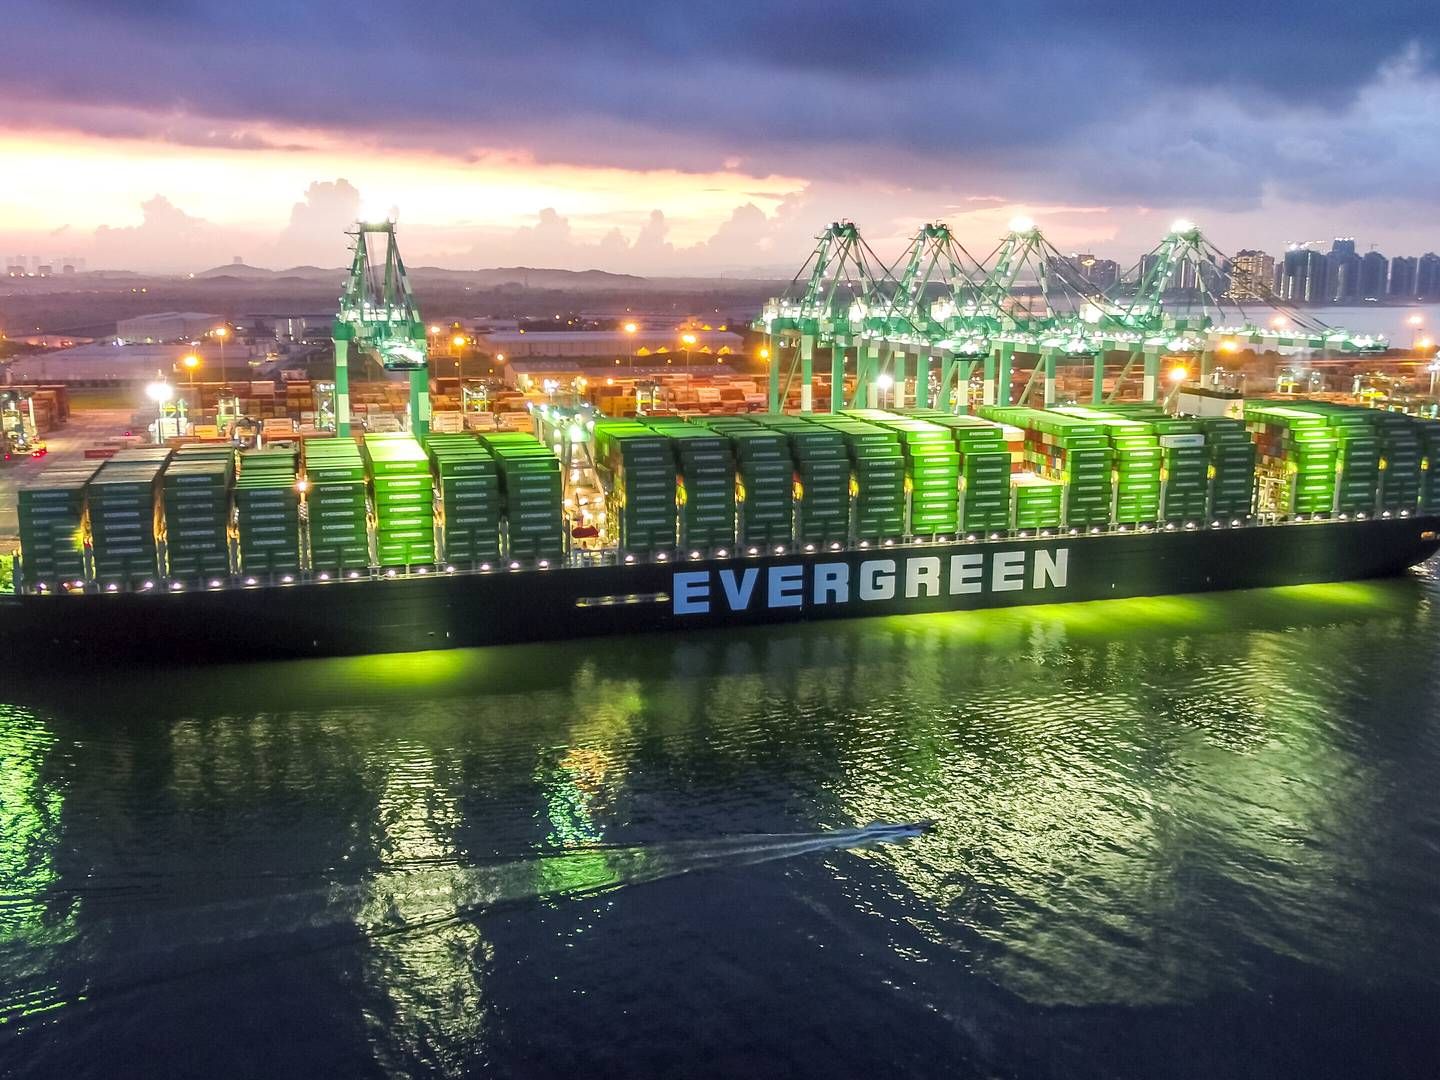 Evergreen reported the best operating margin in the second quarter, according to Alphaliner's survey. | Photo: PR / Evergreen